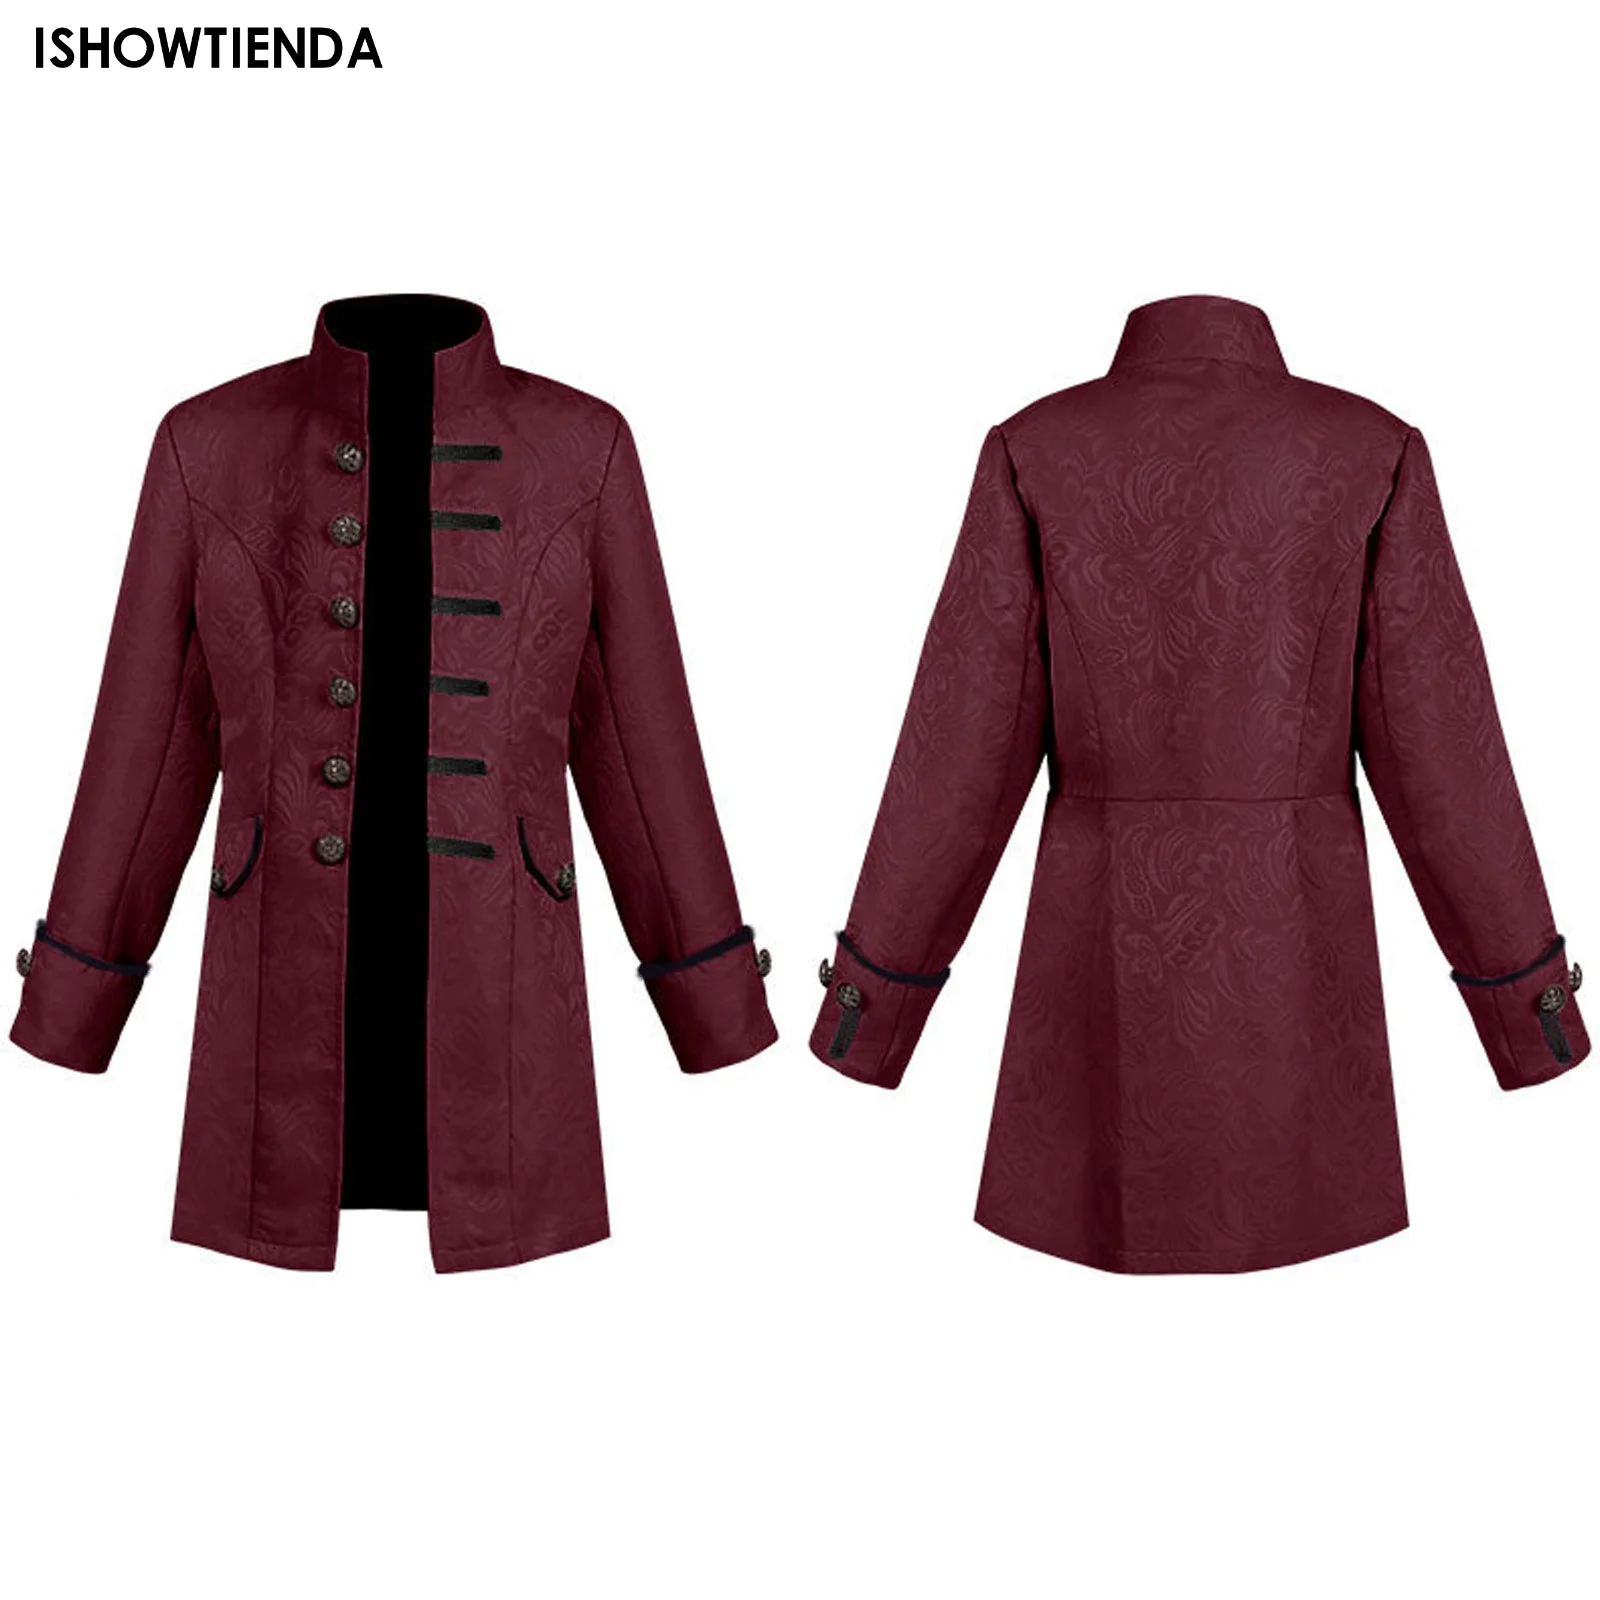 

Renaissance Medieval Steampunk Boys Trench Coat And Shirt Set Vintage Prince Overcoat Victorian Edwardian Jacket Cosplay Costume